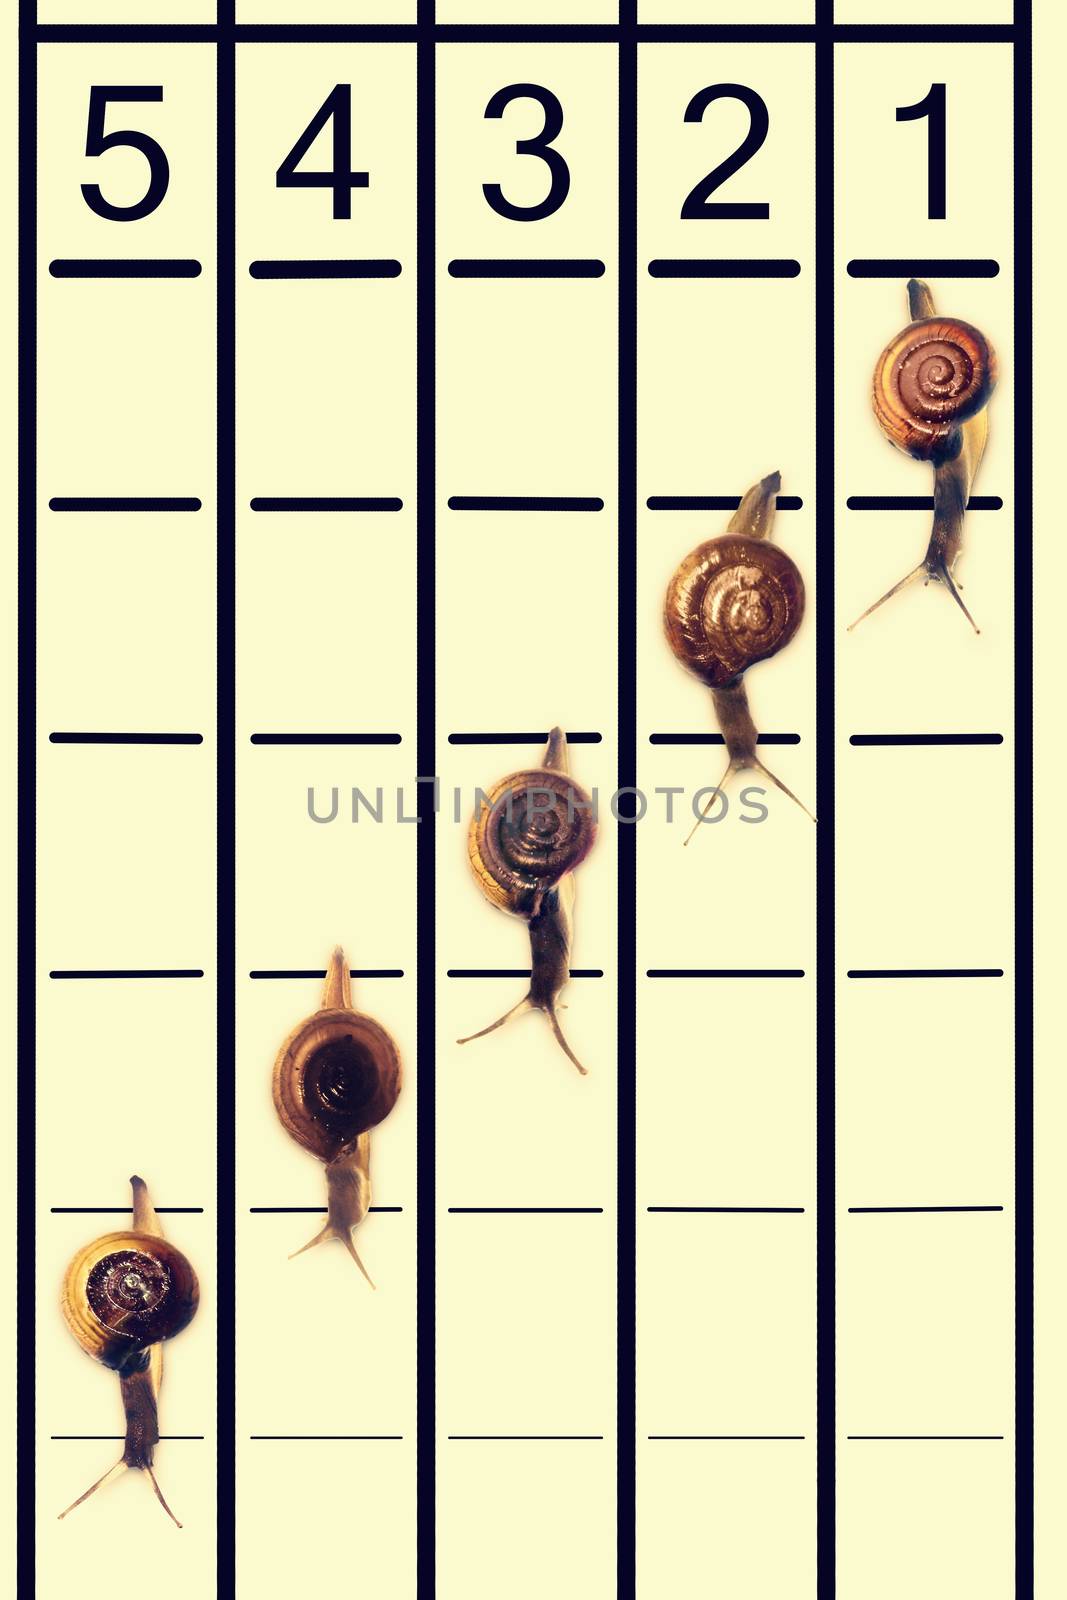 Snails running on track by yands